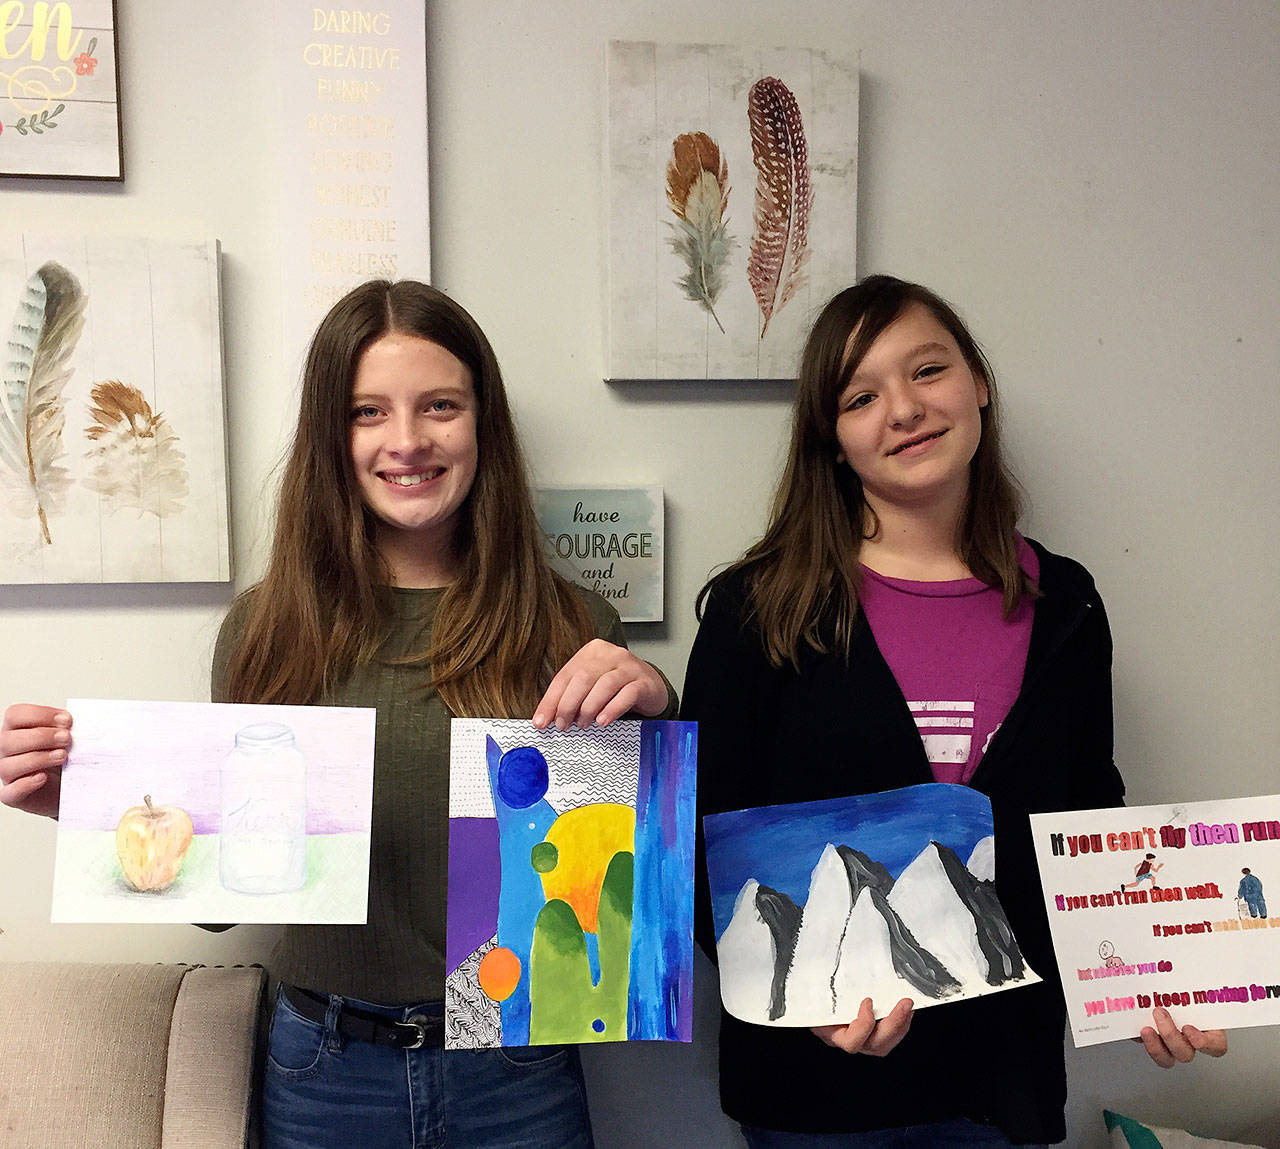 Olympic Christian School students Ellie Smith, left, and Coco Broker display some of their artwork at the school’s recent Art Festival. Smith took top honors in the seventh-/eighth-grade division with her “Galactic Gradients” painting, while Broker placed second with her painting, “The Magnificent Mountains.” Photo courtesy of Olympic Christian School